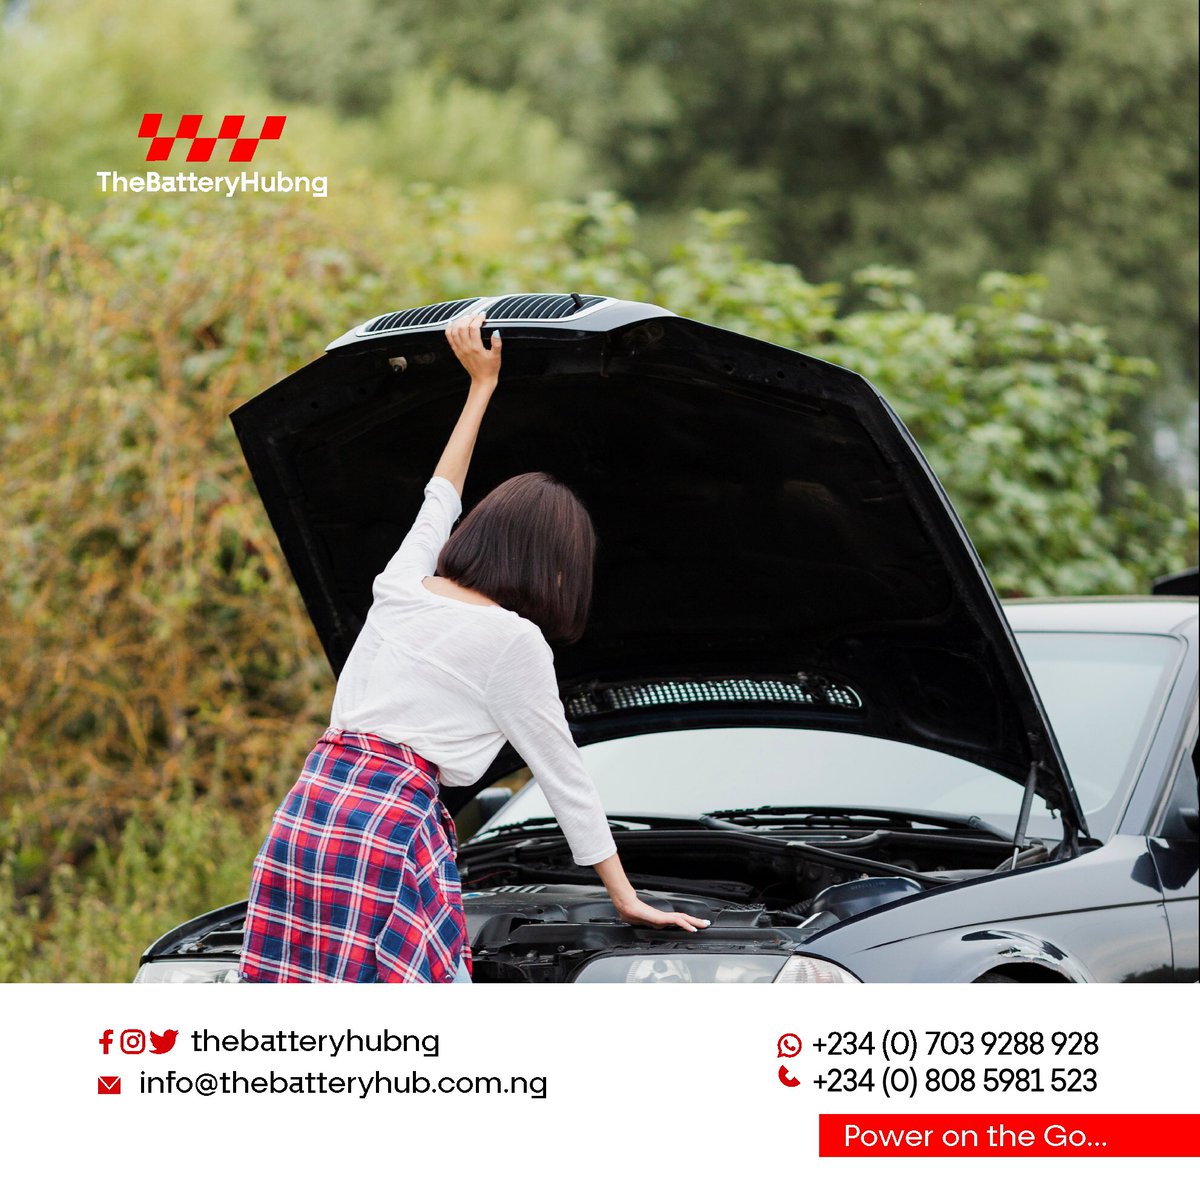 Hubers,We have assured to come through for you Anytime of the Day or Night when you get stranded due to Battery issues and we mean every word of it. 

#thebatteryhubng #poweronthego #247roadsideassistance